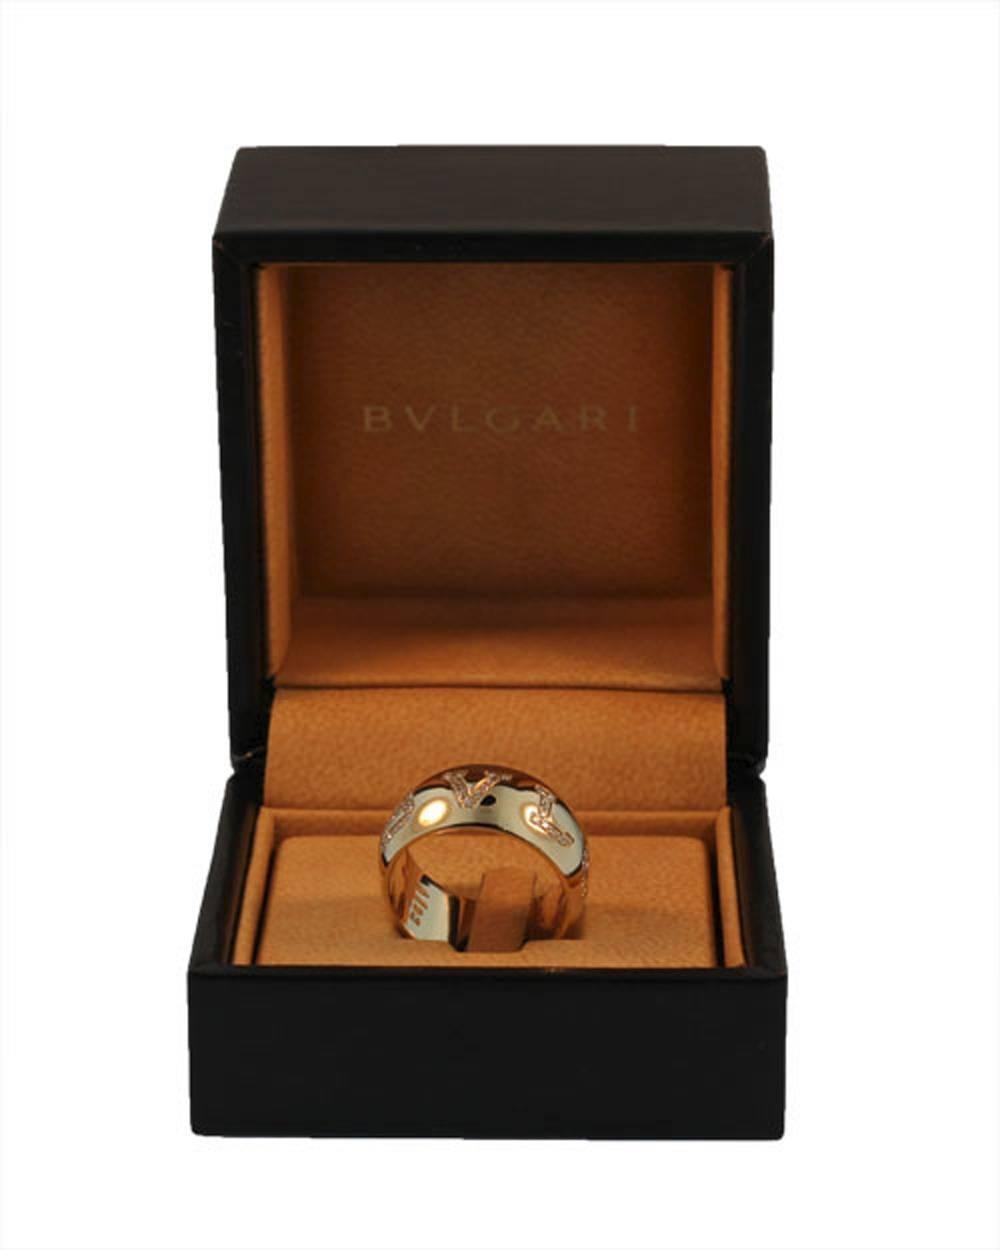 This beautifully executed Bvlgari ring is 18kt yellow gold. It is set with .50cts of fine high quality diamonds EF-VS. The Bvlgari signature is sculpted around the ring and the diamonds are embedded in each letter. This ring comes with its original